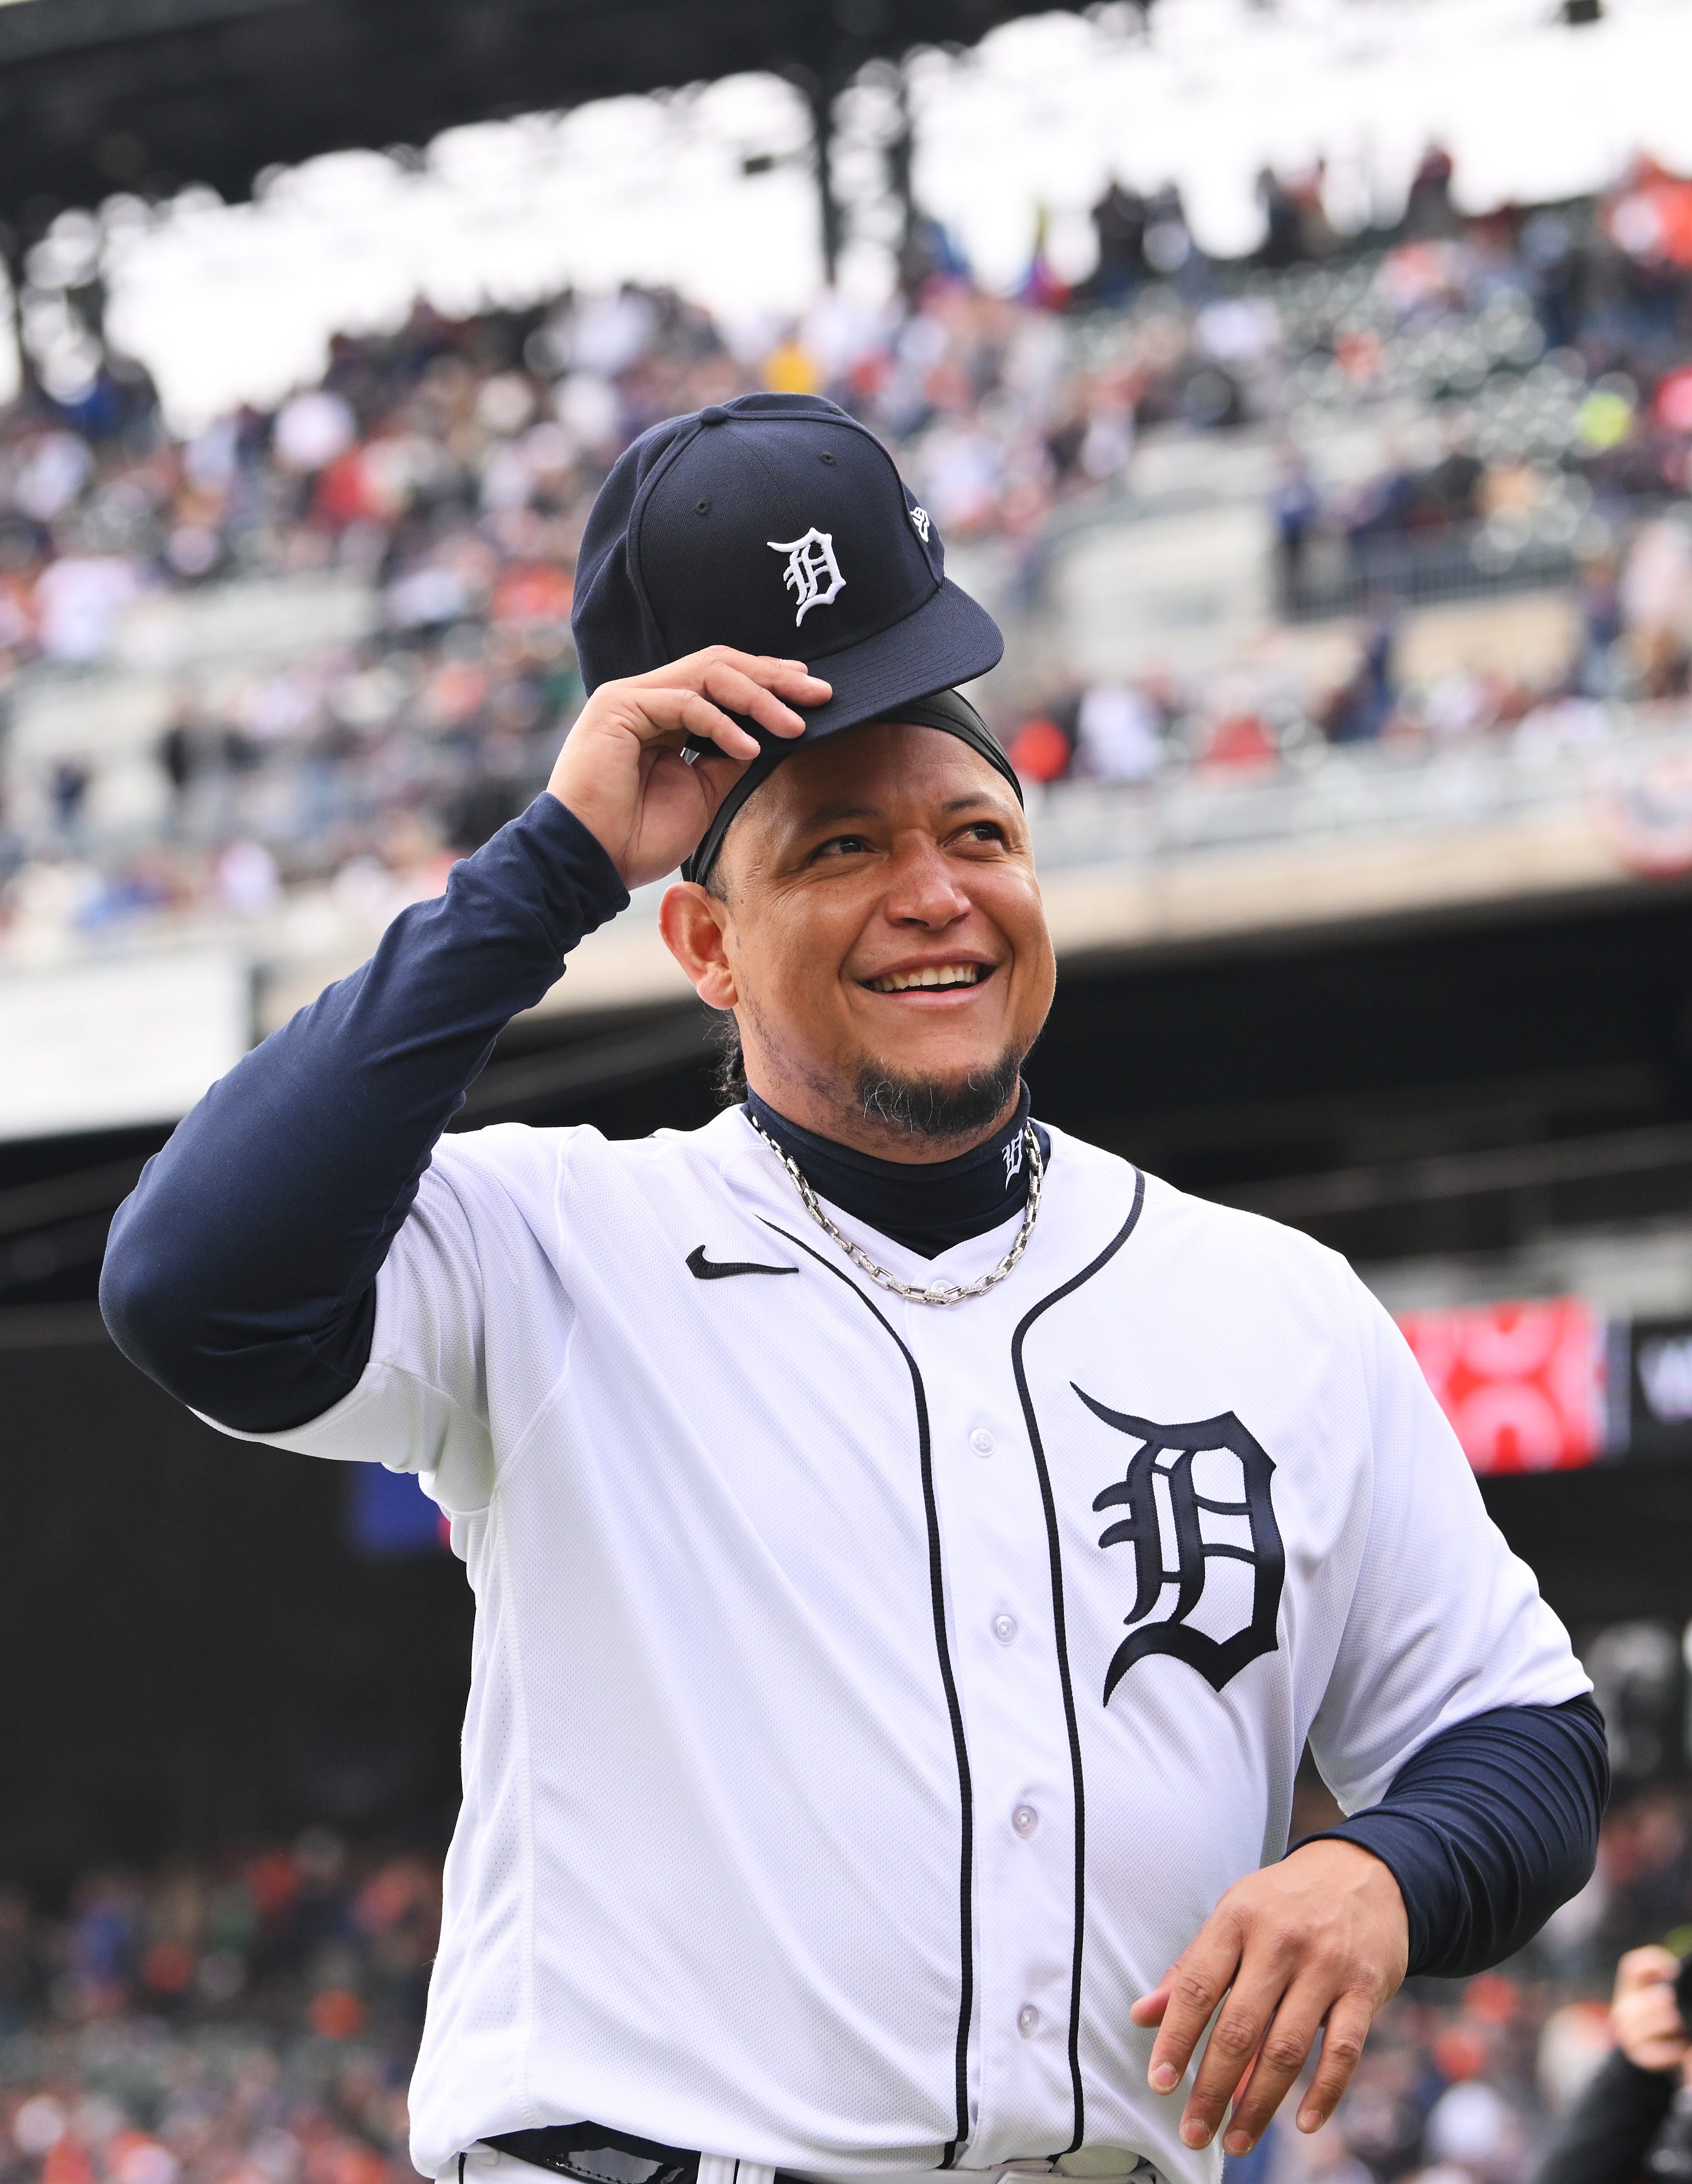 Tigers slugger Miguel Cabrera smiles and looks to the crowd at the end of pre-game introductions during his final home opener in Detroit. Tigers home opener against the Boston Red Sox in Detroit on Thursday, April 6, 2023.